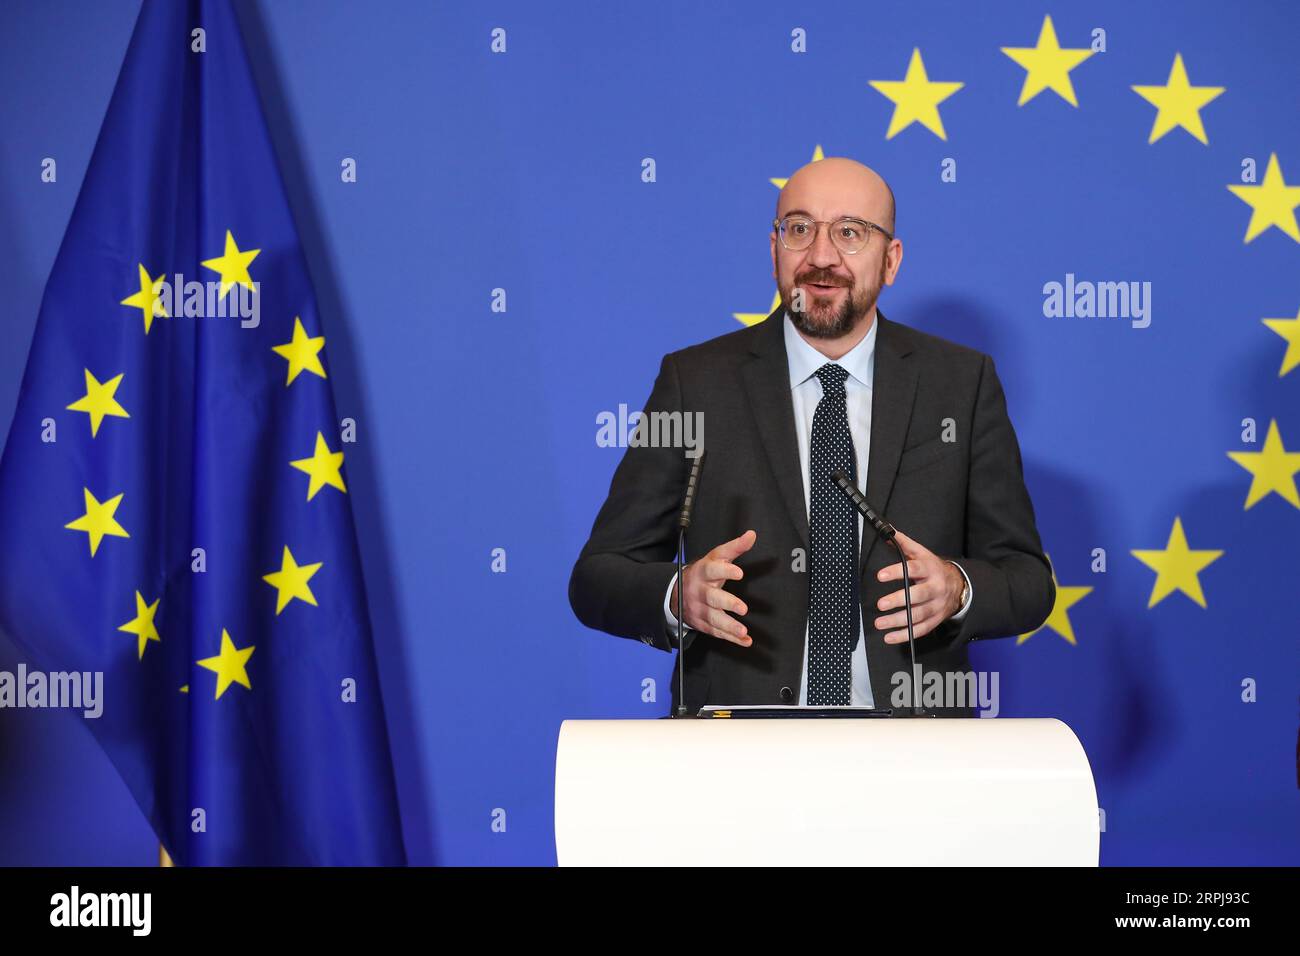 191201 -- BRUSSELS, Dec. 1, 2019 -- European Council President Charles Michel delivers a speech during a ceremony to mark the 10th anniversary of the entry into force of the Lisbon Treaty, at the House of European History in Brussels, Belgium, Dec. 1, 2019.  BELGIUM-BRUSSELS-LISBON TREATY-10TH ANNIVERSARY ZhangxCheng PUBLICATIONxNOTxINxCHN Stock Photo